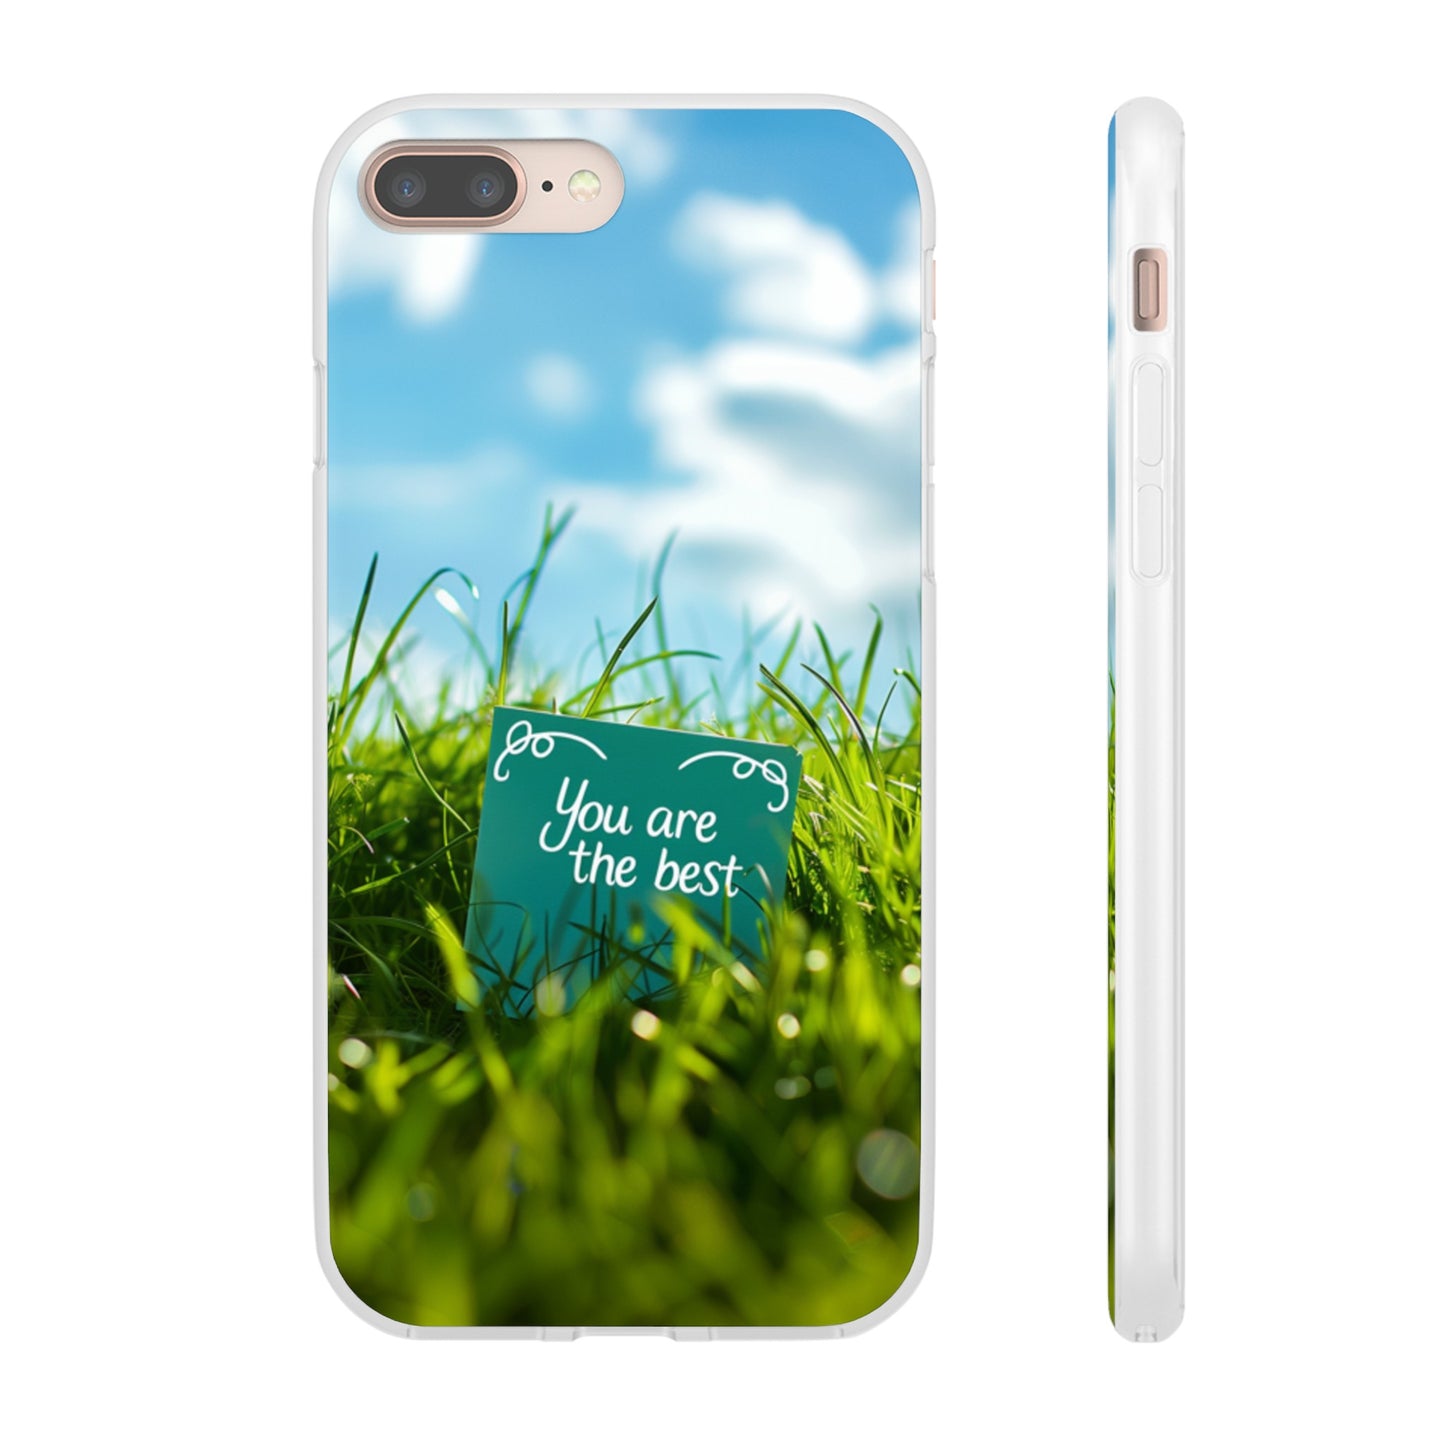 Flexi Cases - You are the best 2